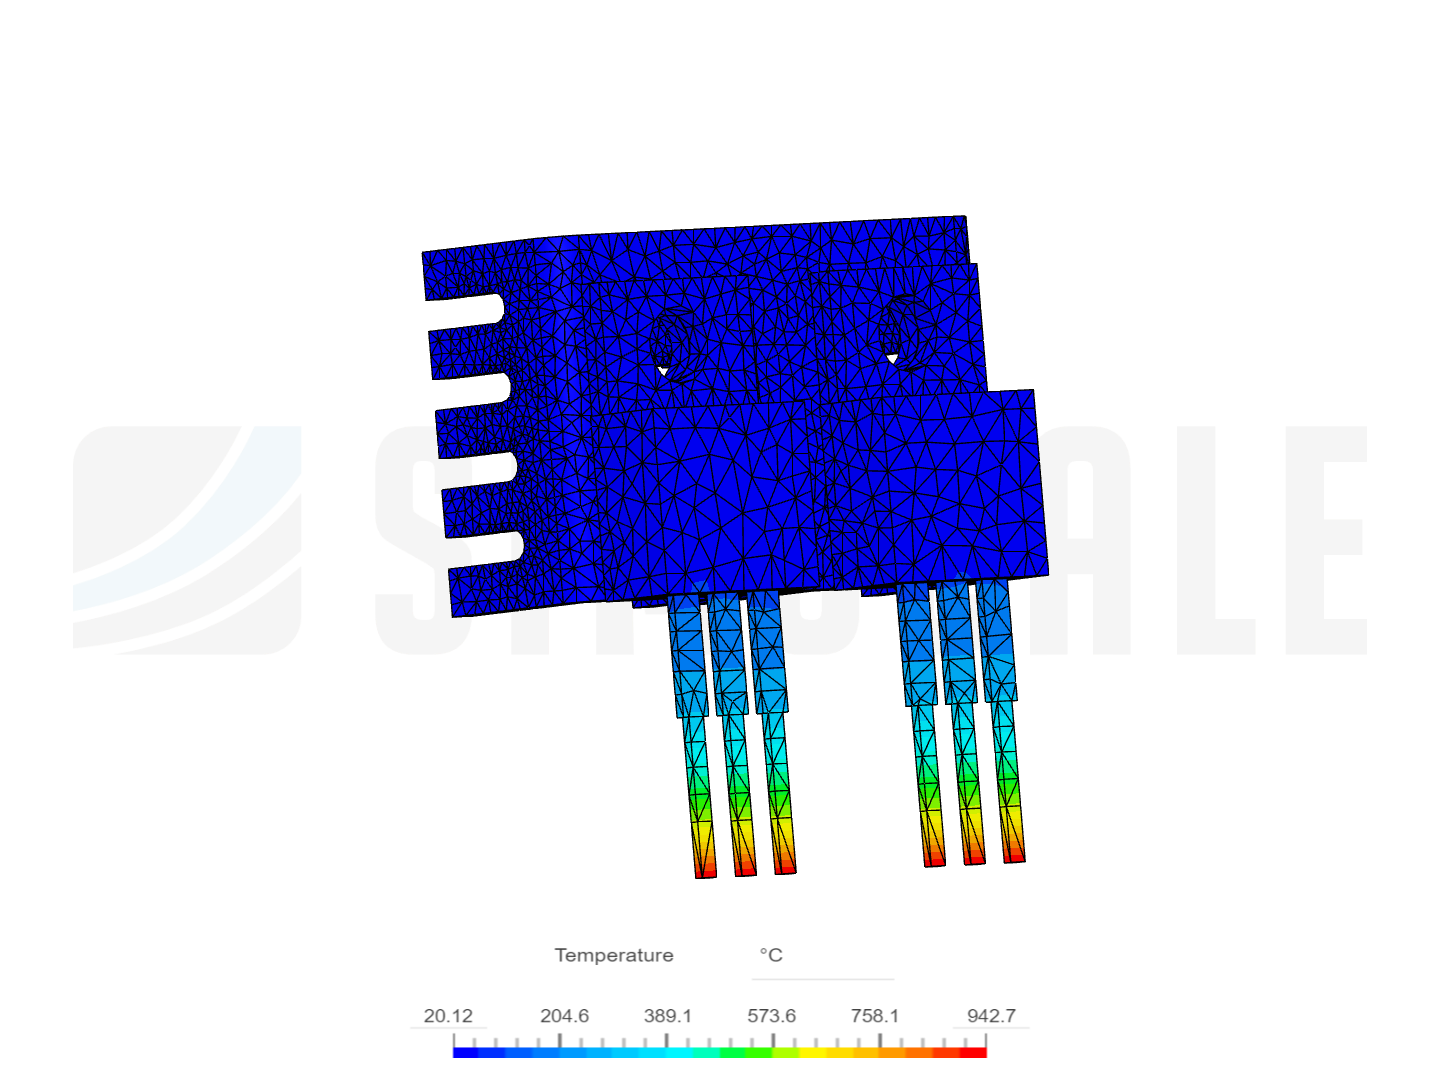 Amp_schematic_v2.2_Double_Heat_Sink image